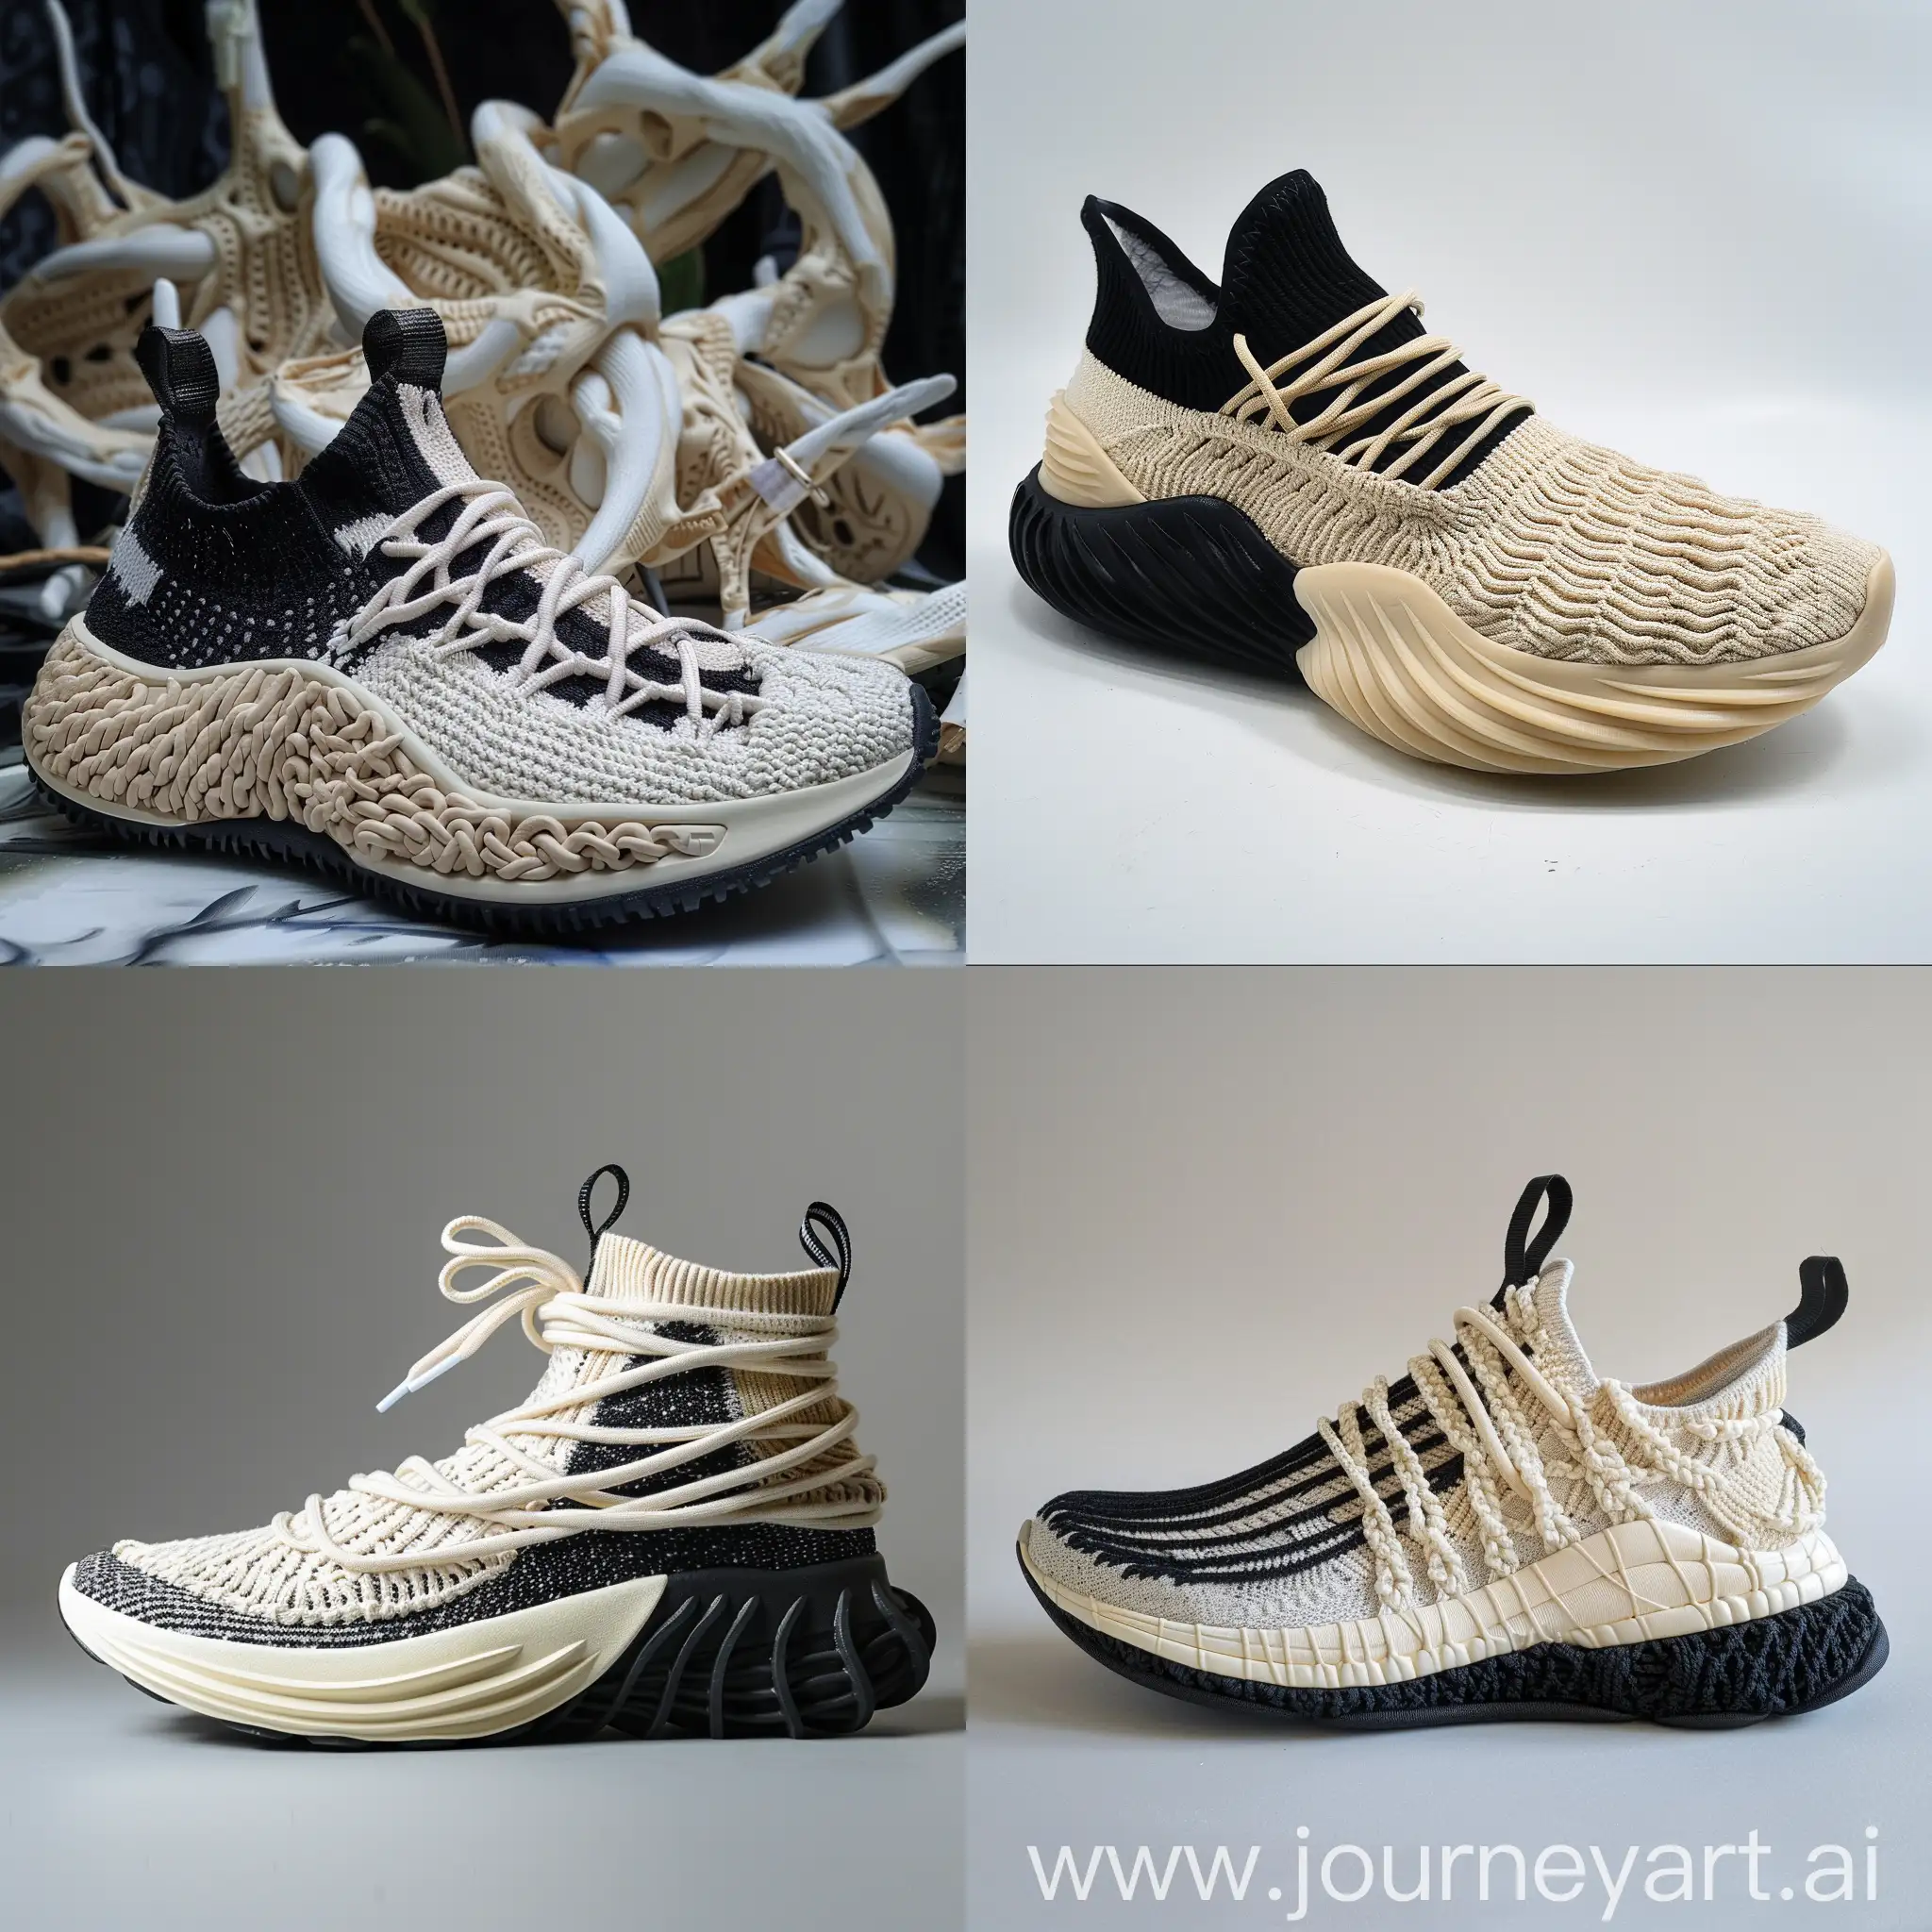 Shark-Bone-Inspired-Cream-Running-Sneakers-with-Knitted-Details